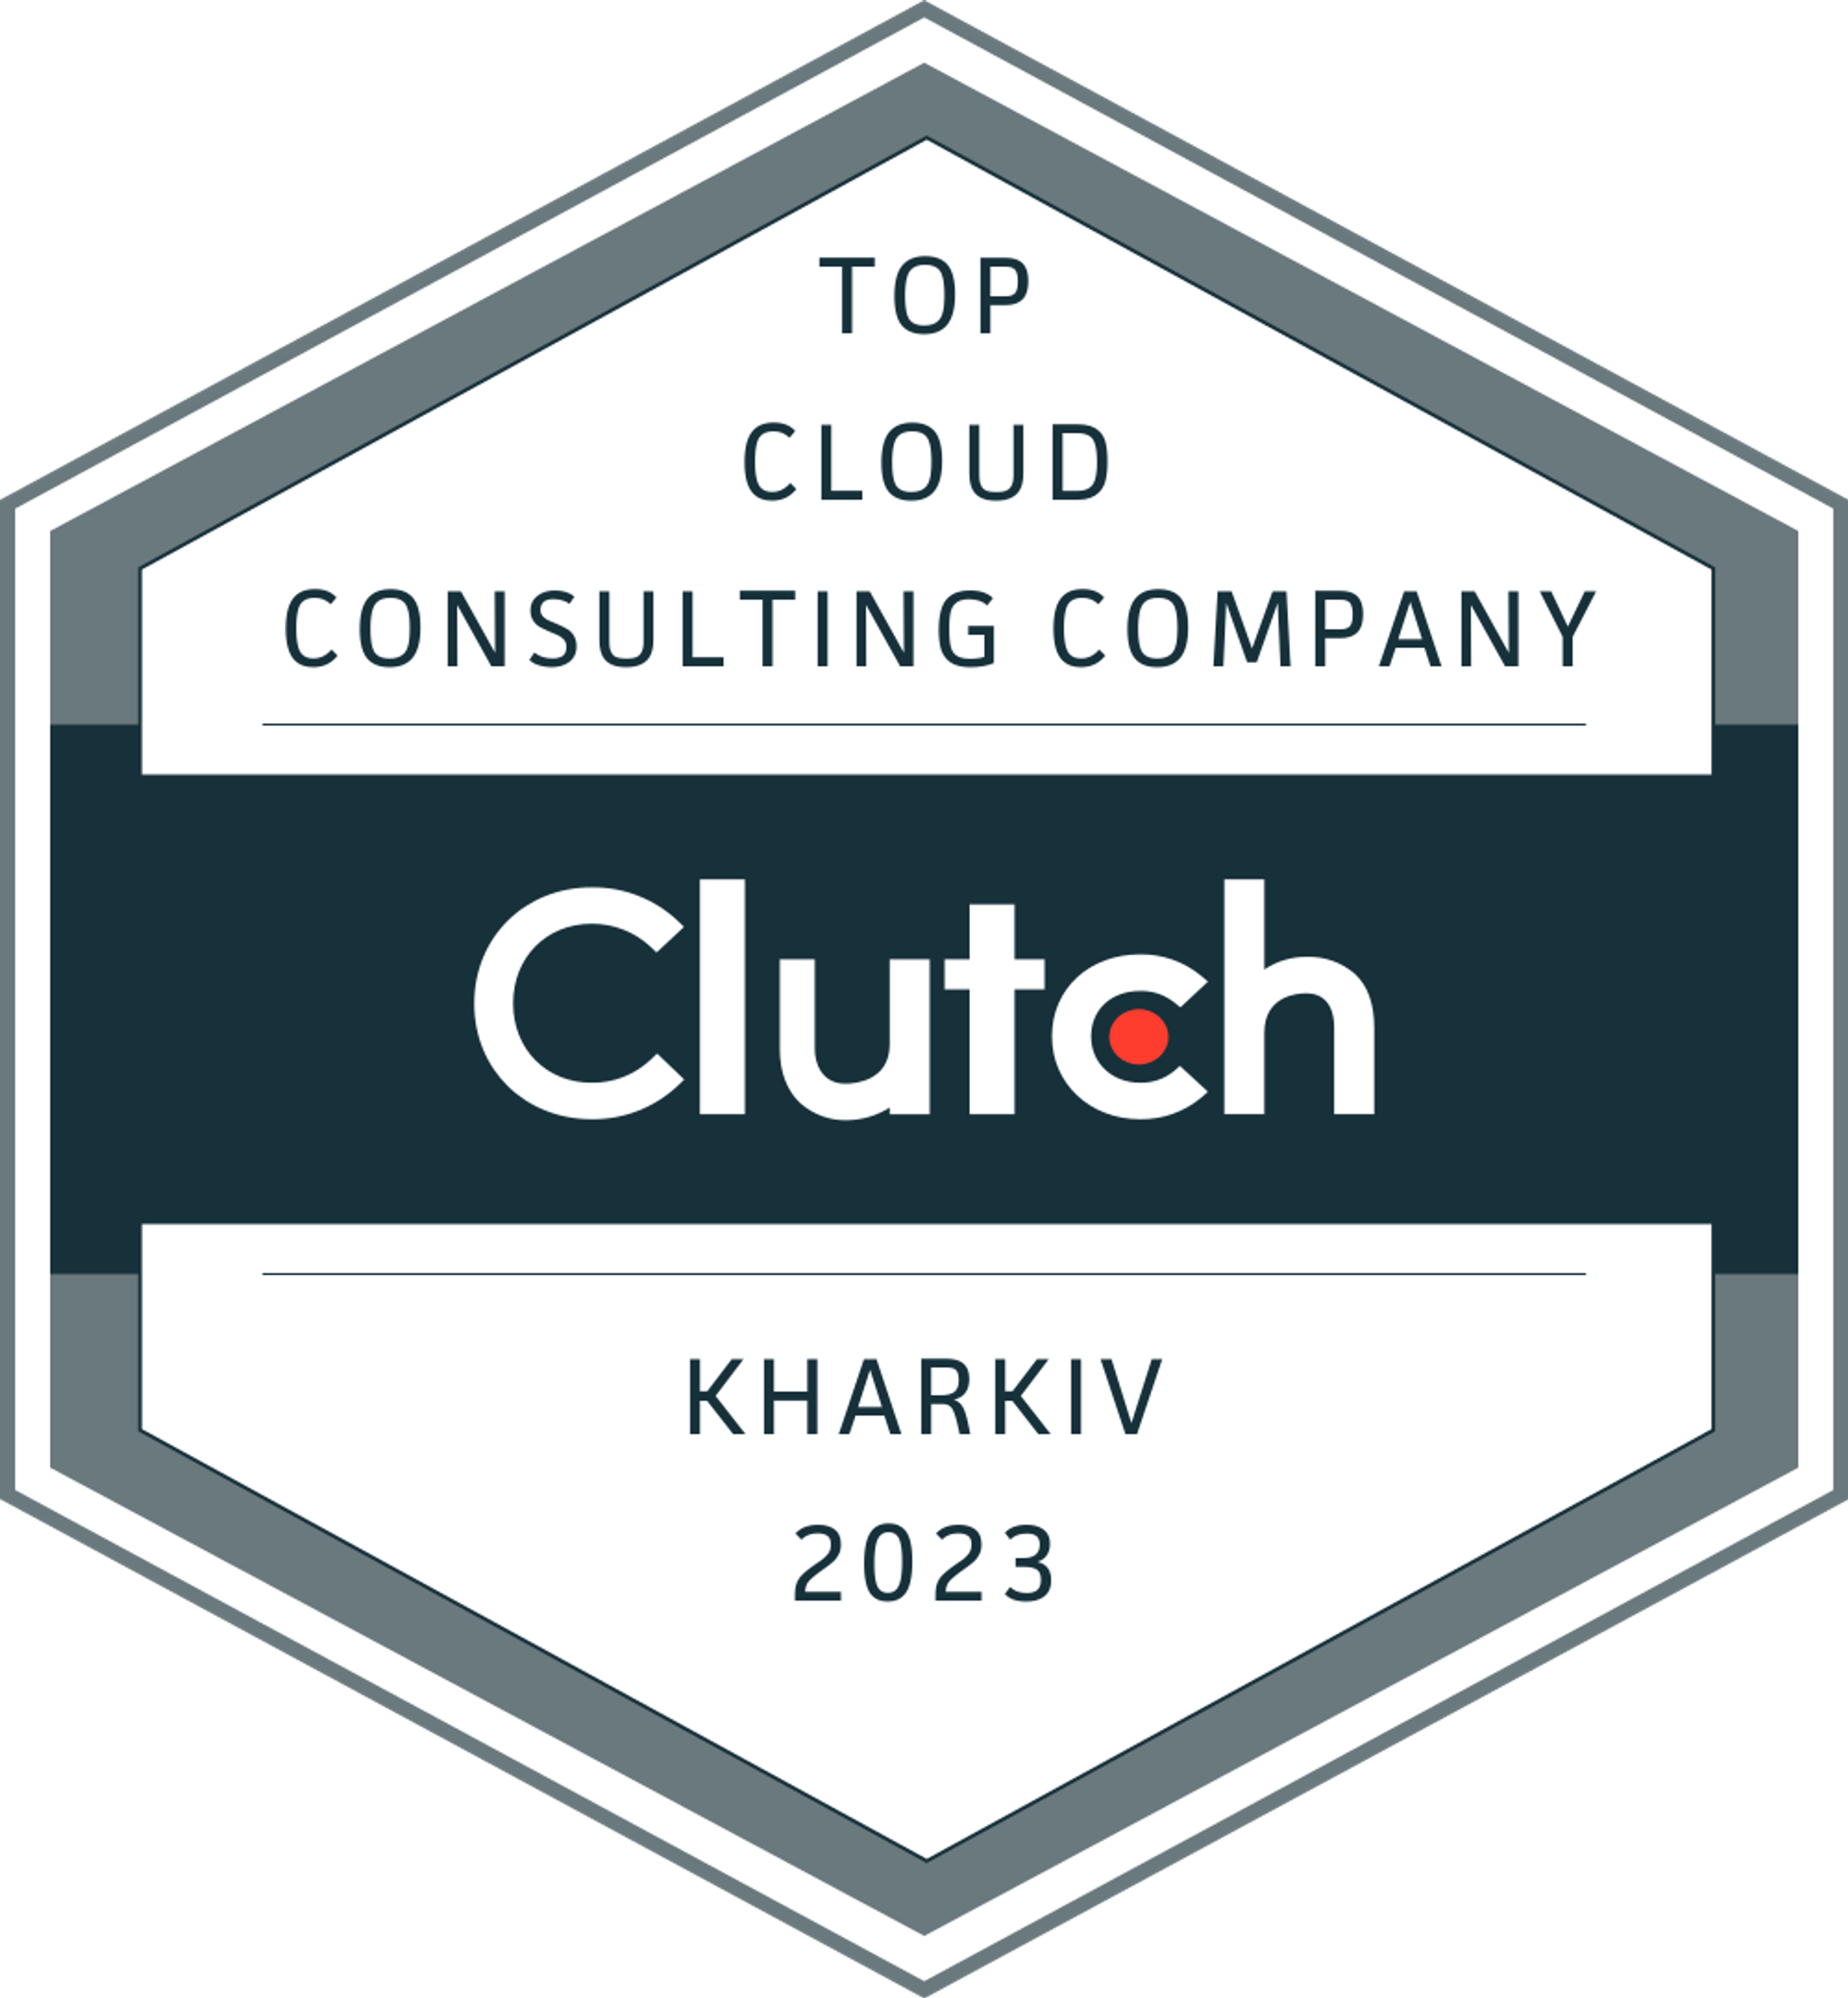 Top Cloud Consulting Company